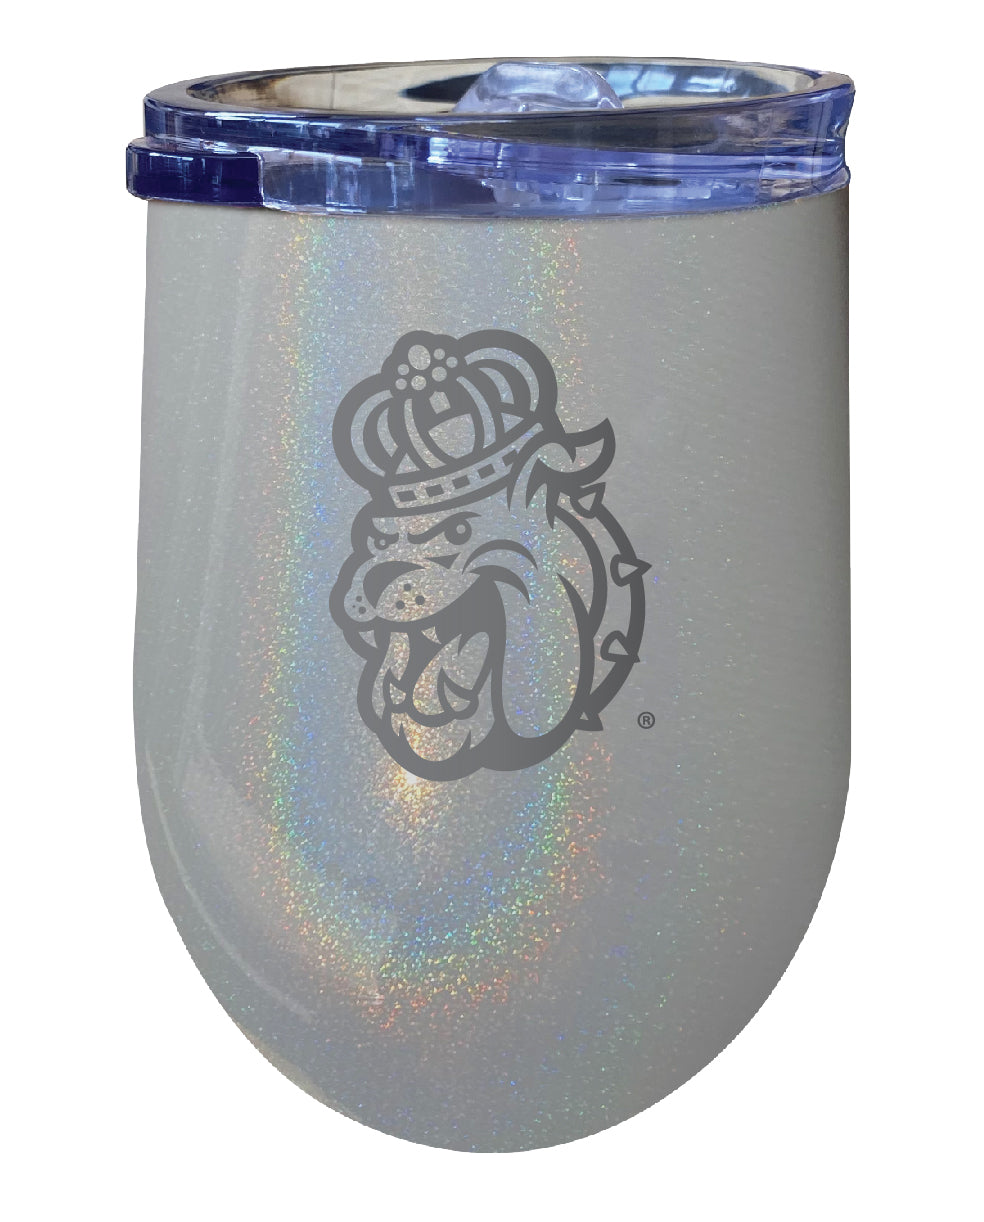 James Madison Dukes 12 oz Laser Etched Insulated Wine Stainless Steel Tumbler Rainbow Glitter Grey